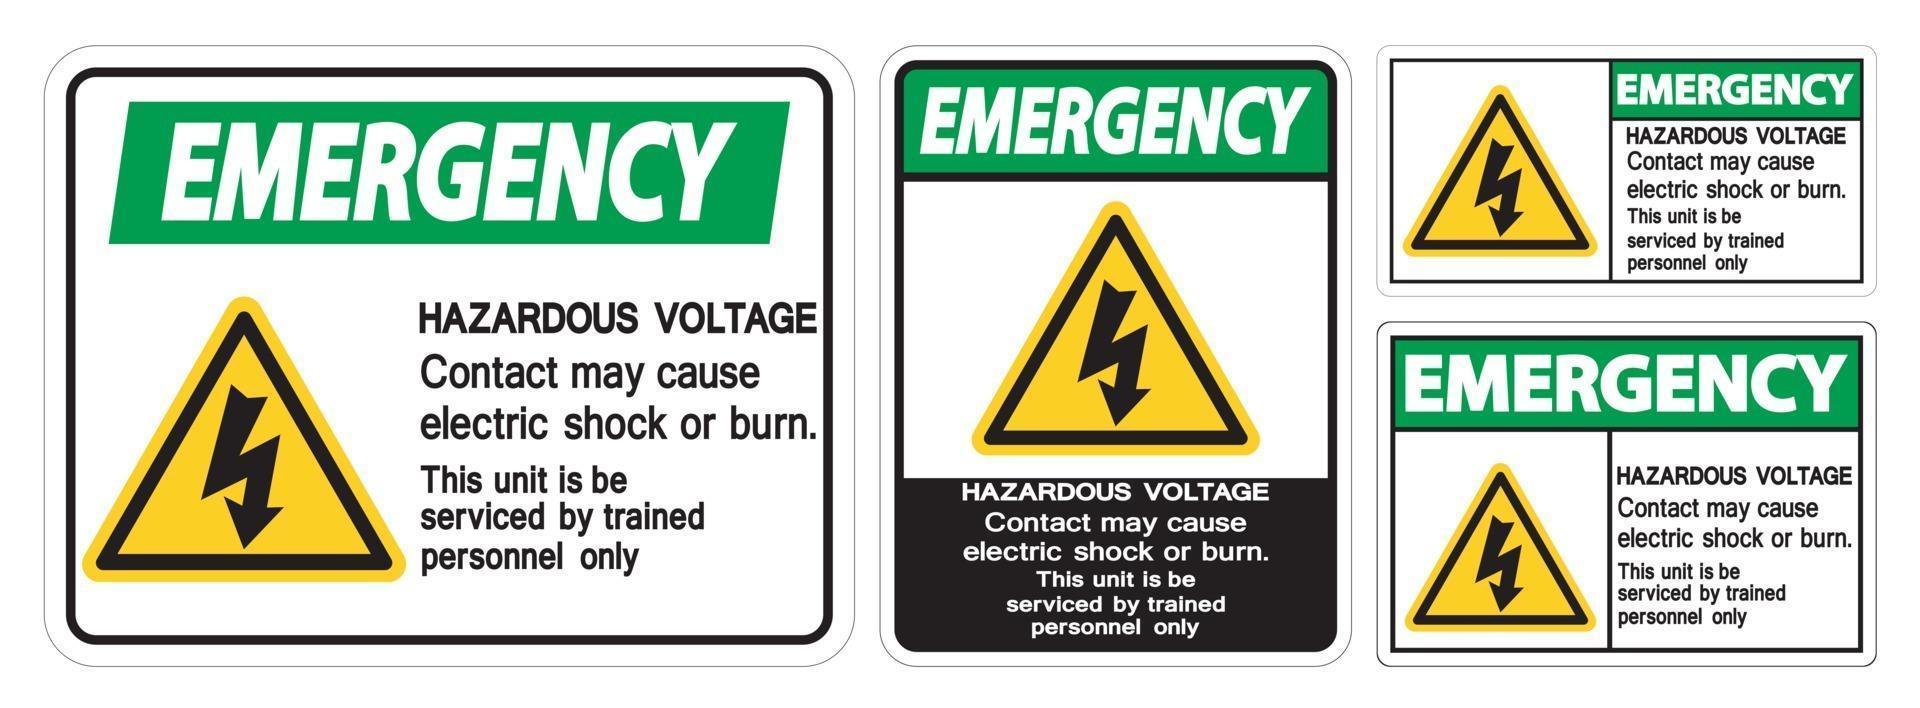 Emergency Hazardous Voltage Contact May Cause Electric Shock Or Burn Sign On White Background vector